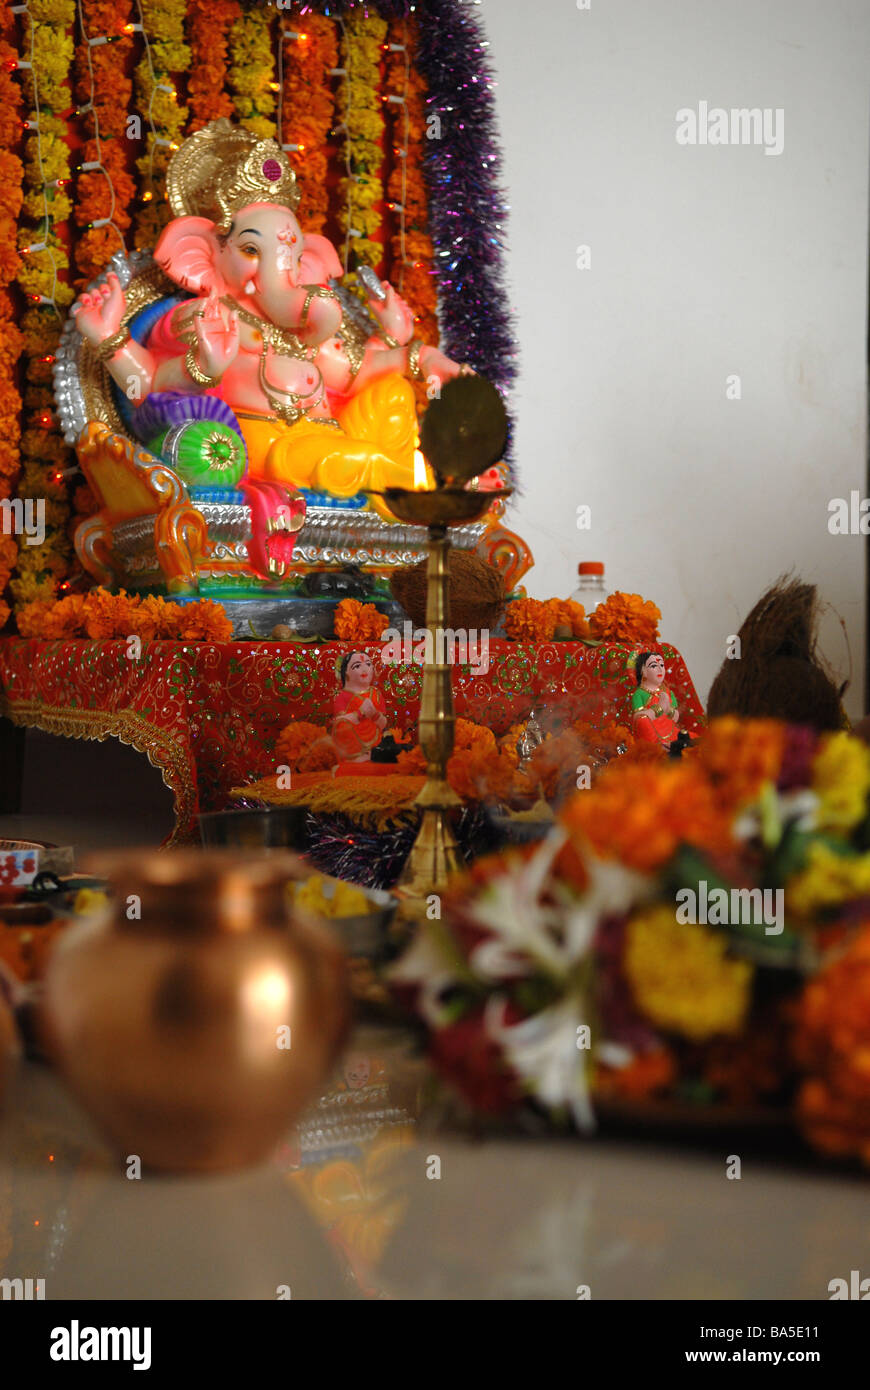 This is a photo of  a ganash statue taken in someone's home. Photo was taken during Mumbai's ganpati festival Stock Photo